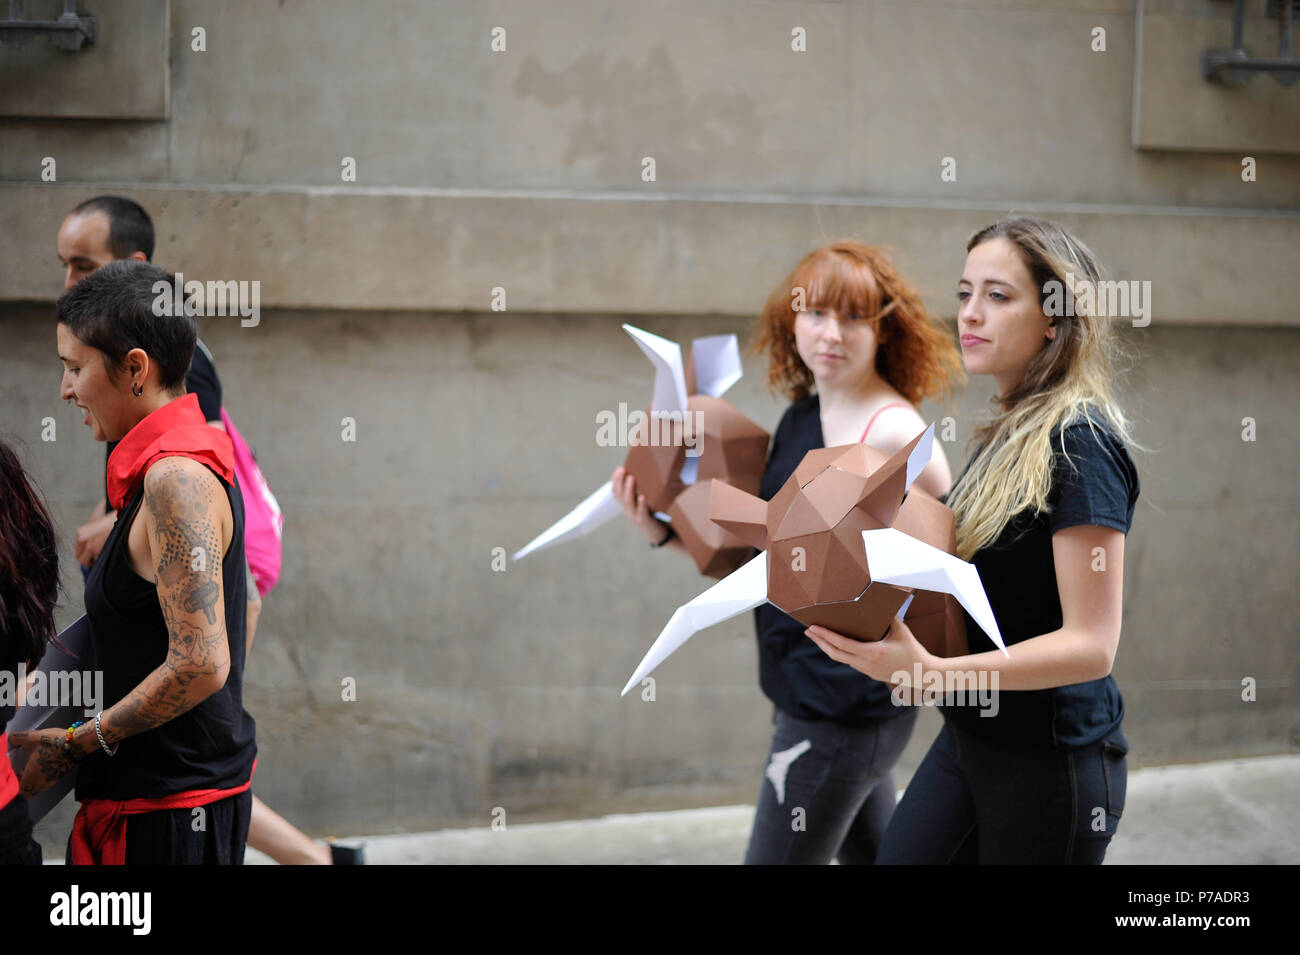 Pamplona, Spain. 5th July, 2018. Activists from PETA and AnimaNaturalis stage a protest in Pamplona on July 5, 2018 ahead of the San Fermin festival and its infamous running of the bulls. The organizations demand that the festival be stopped due to animal cruelty. Credit: Mikel Cia Da Riva/Alamy Live News Stock Photo